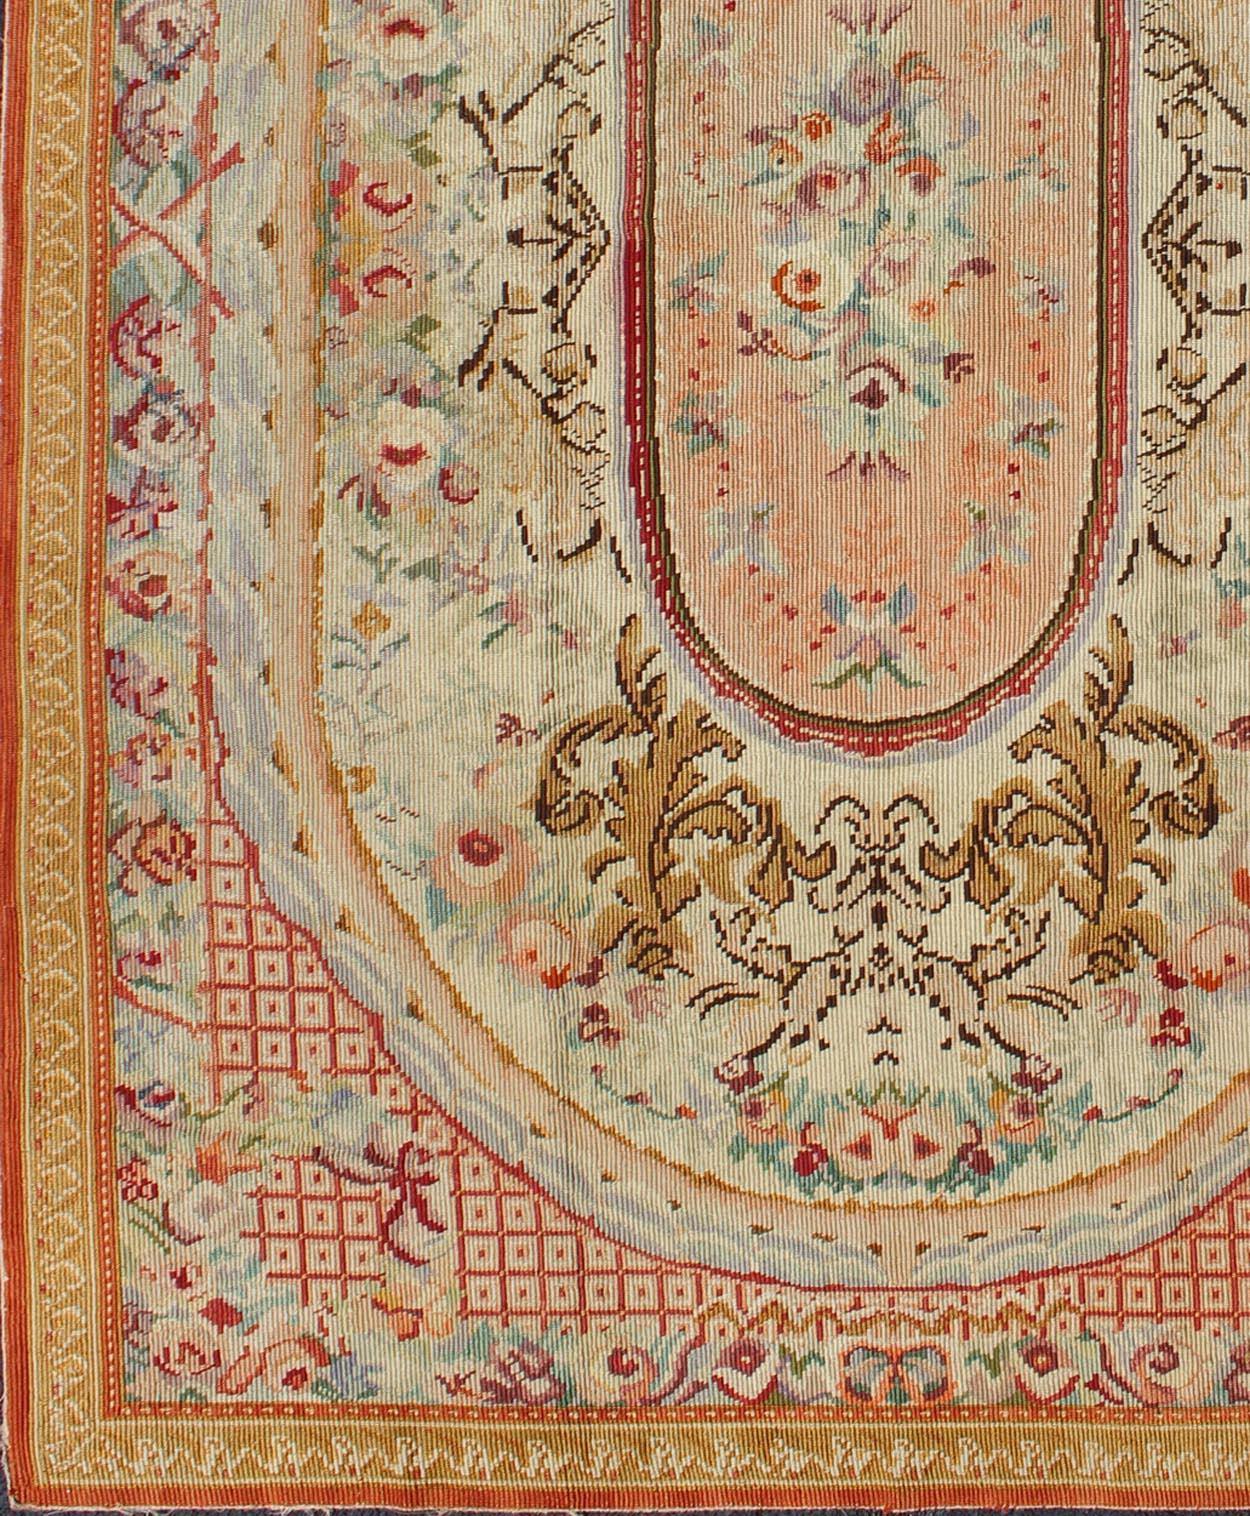 Antique English Needlepoint with Floral Design and Central Floral Medallion. Rug/I-0201, French Aubusson, Needlepoint Aubusson. 

This colorful antique English needlepoint Aubusson features multi layered floral medallion design which displays